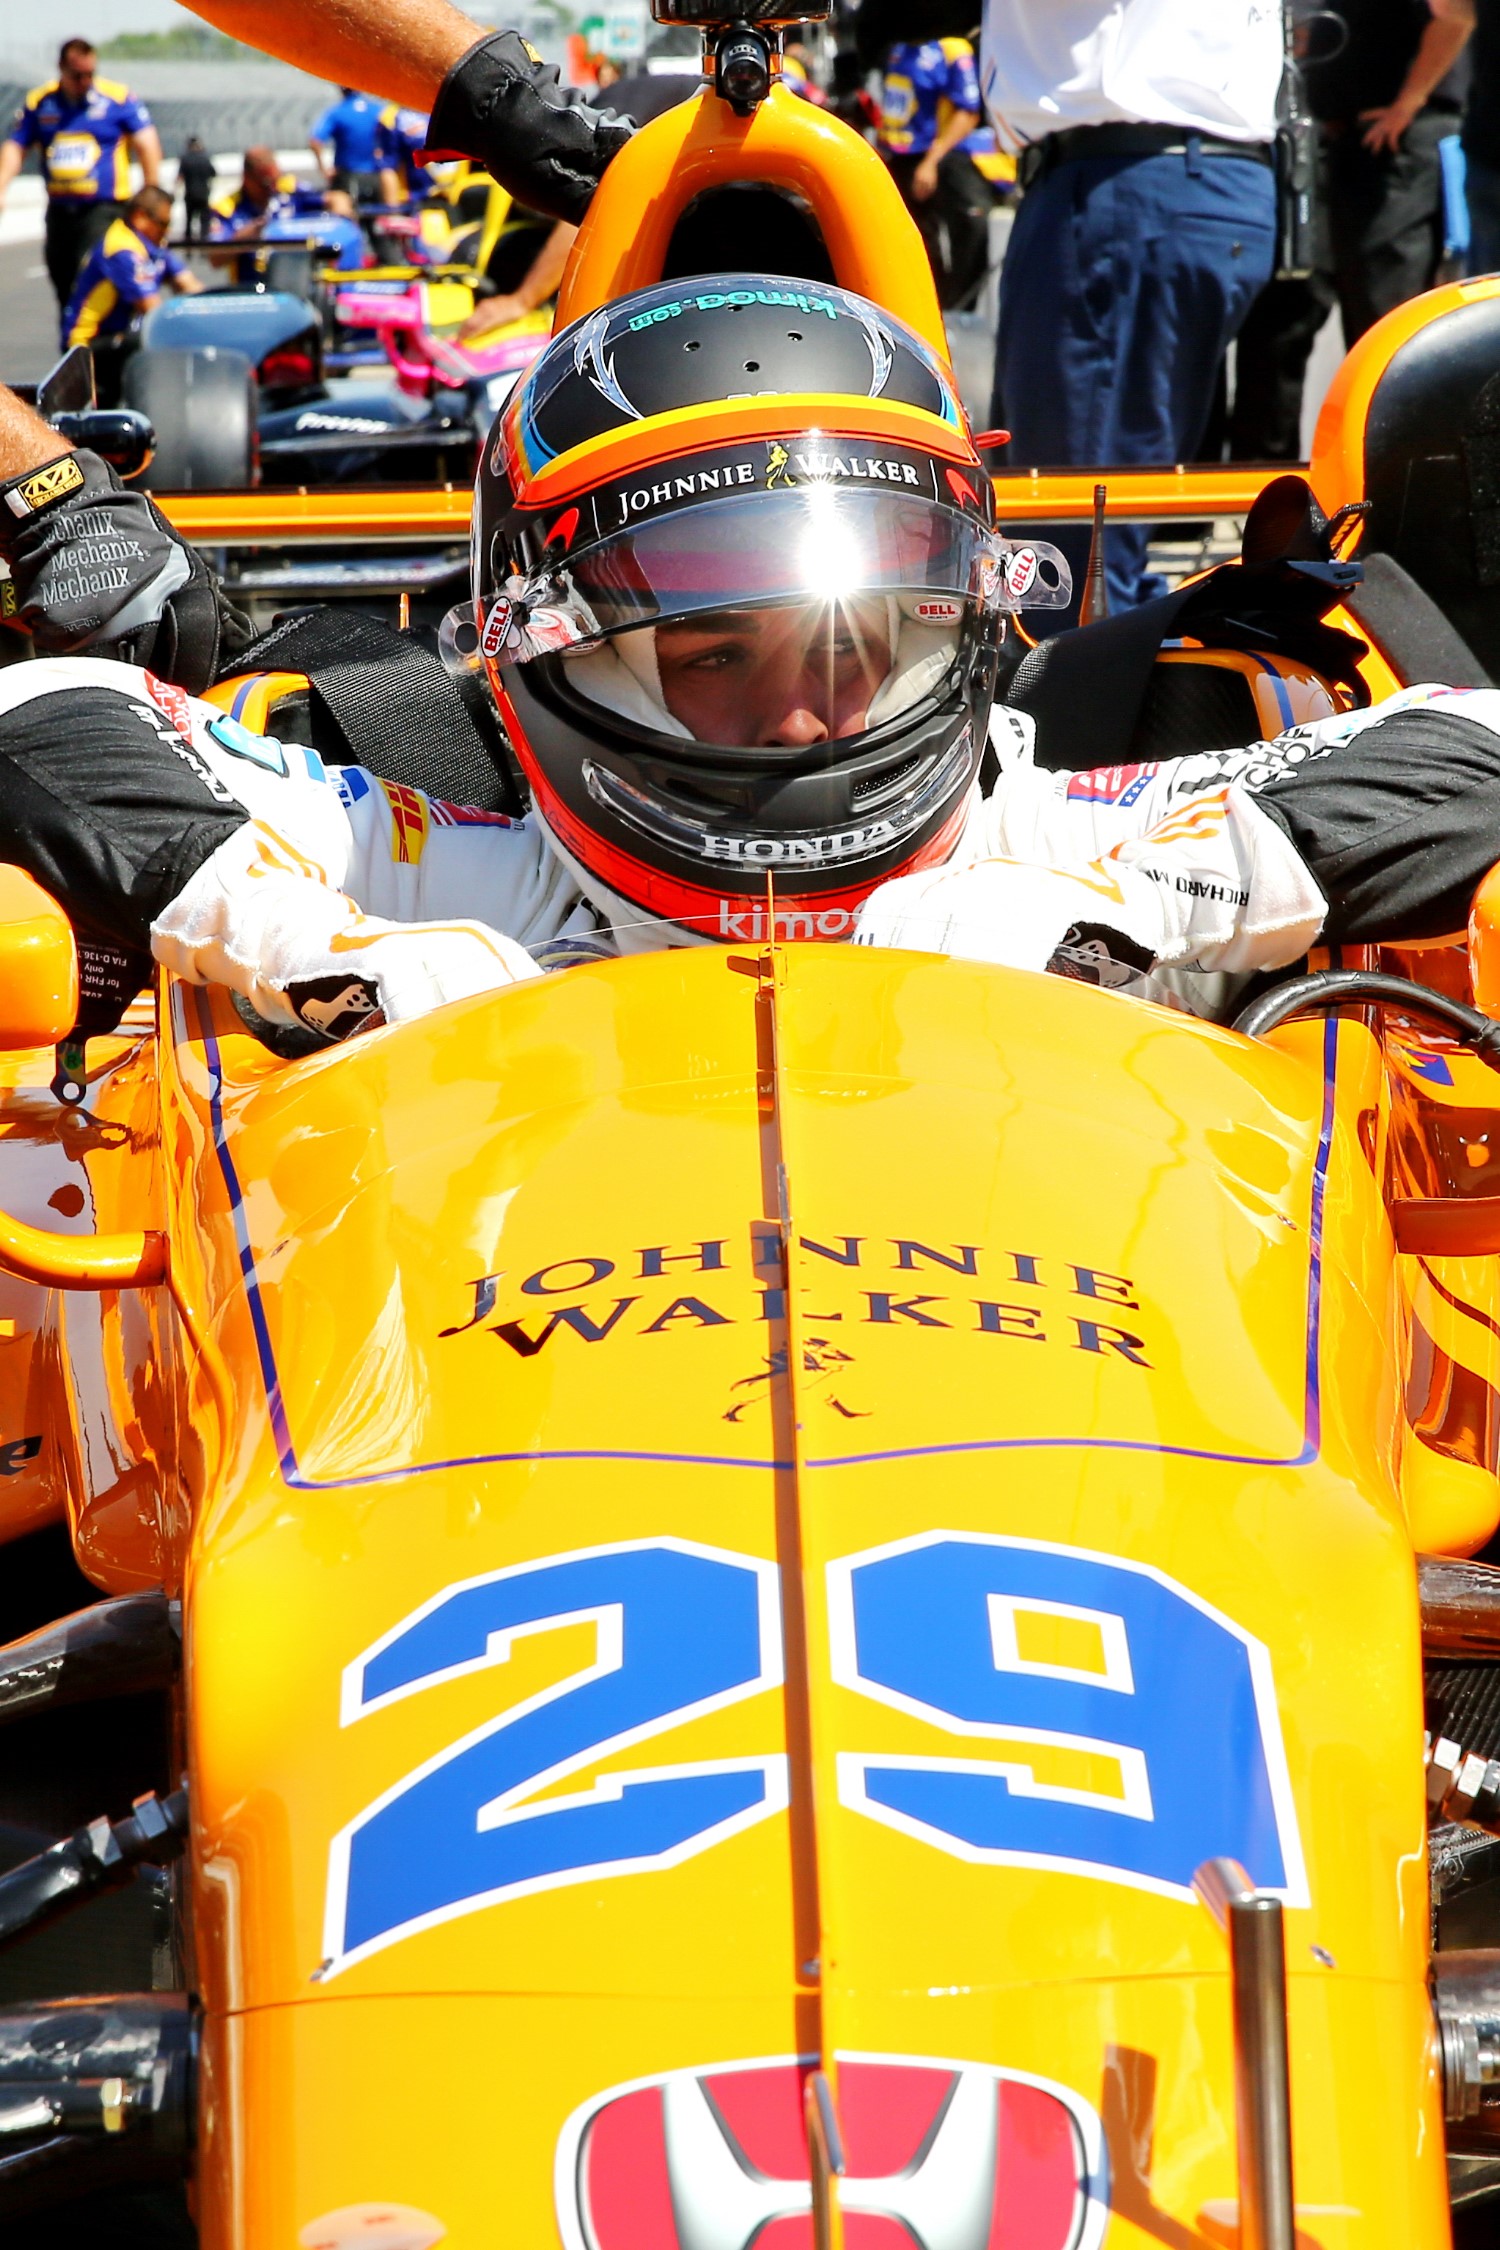 Alonso at Indy in 2017